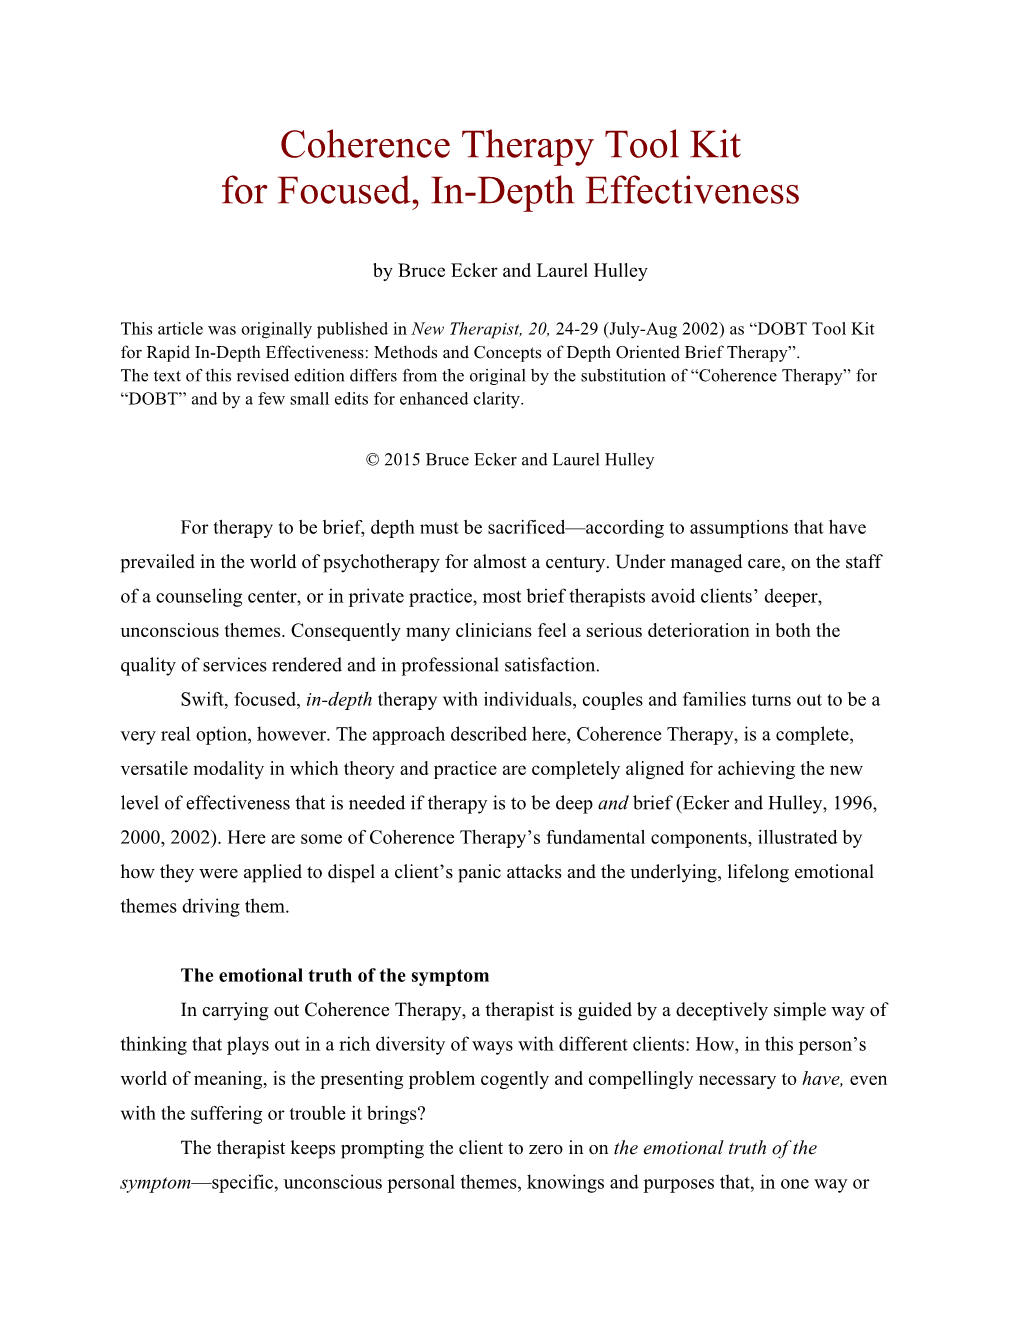 Coherence Therapy Toolkit for Focused, In-Depth Effectiveness